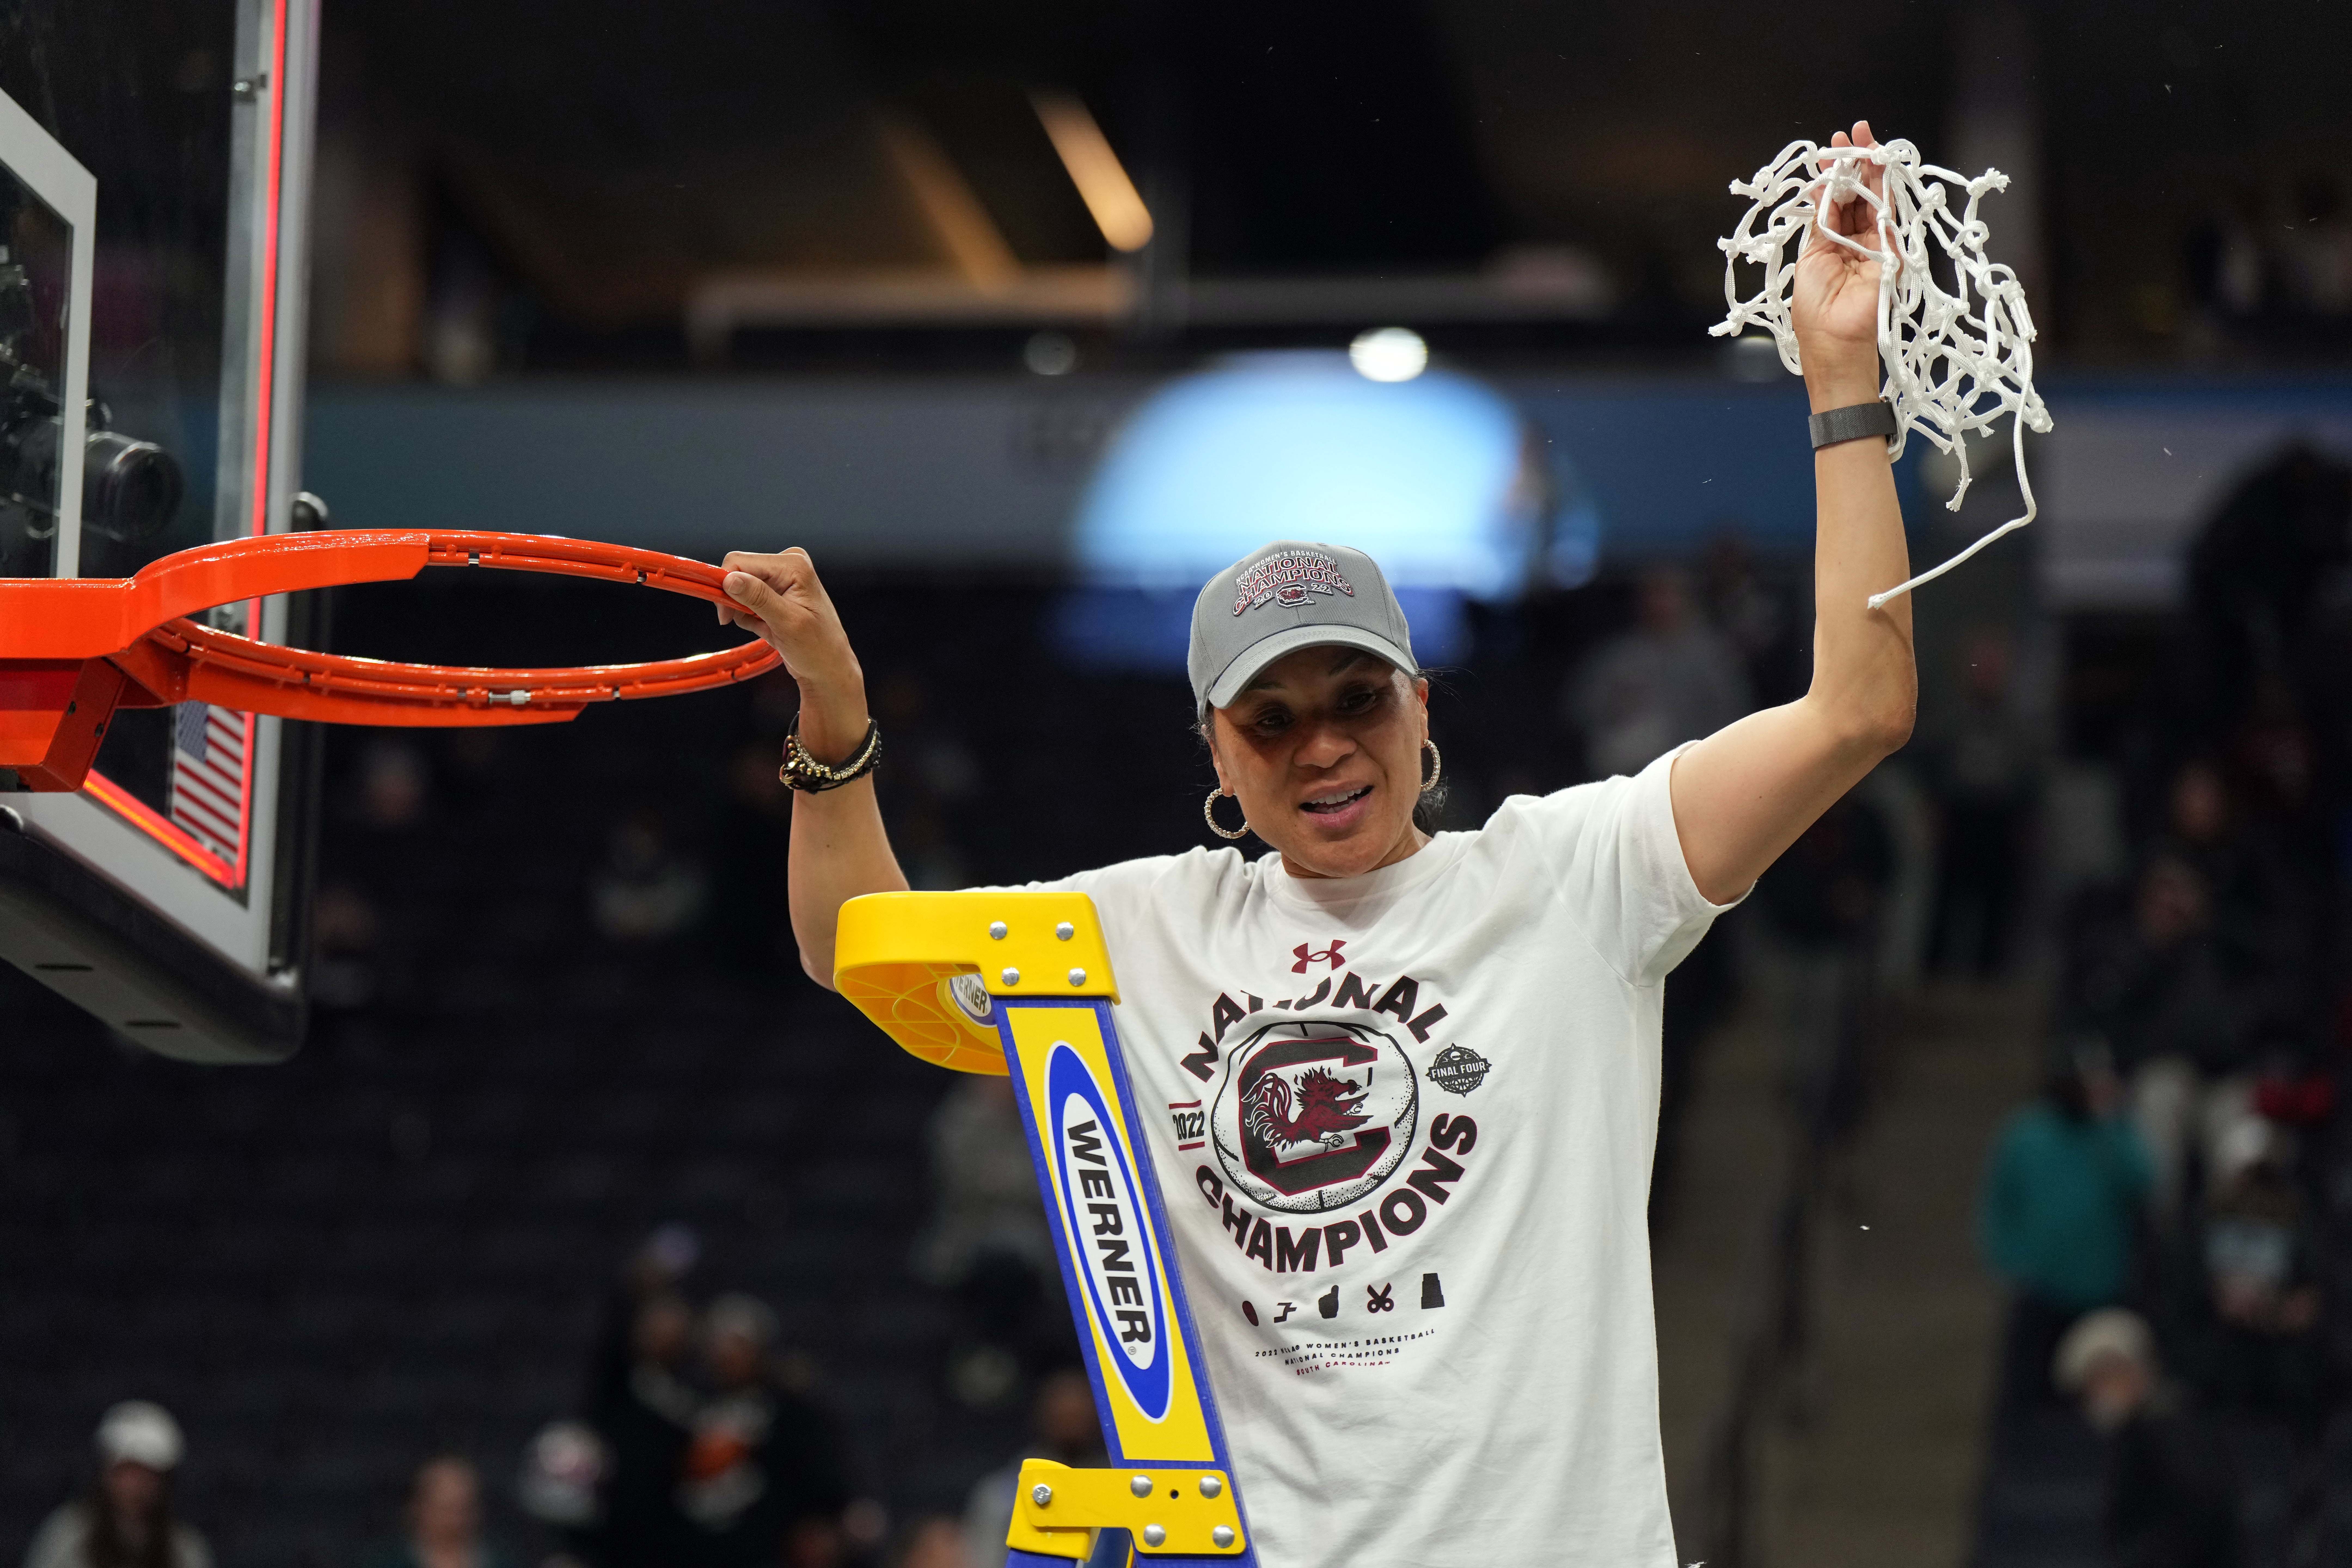 Apr 3, 2022; Minneapolis, MN, USA; South Carolina Gamecocks head coach Dawn Staley cuts down the net as they celebrate their 64-49 victory over the UConn Huskies in the Final Four championship game of the women's college basketball NCAA Tournament at Target Center.